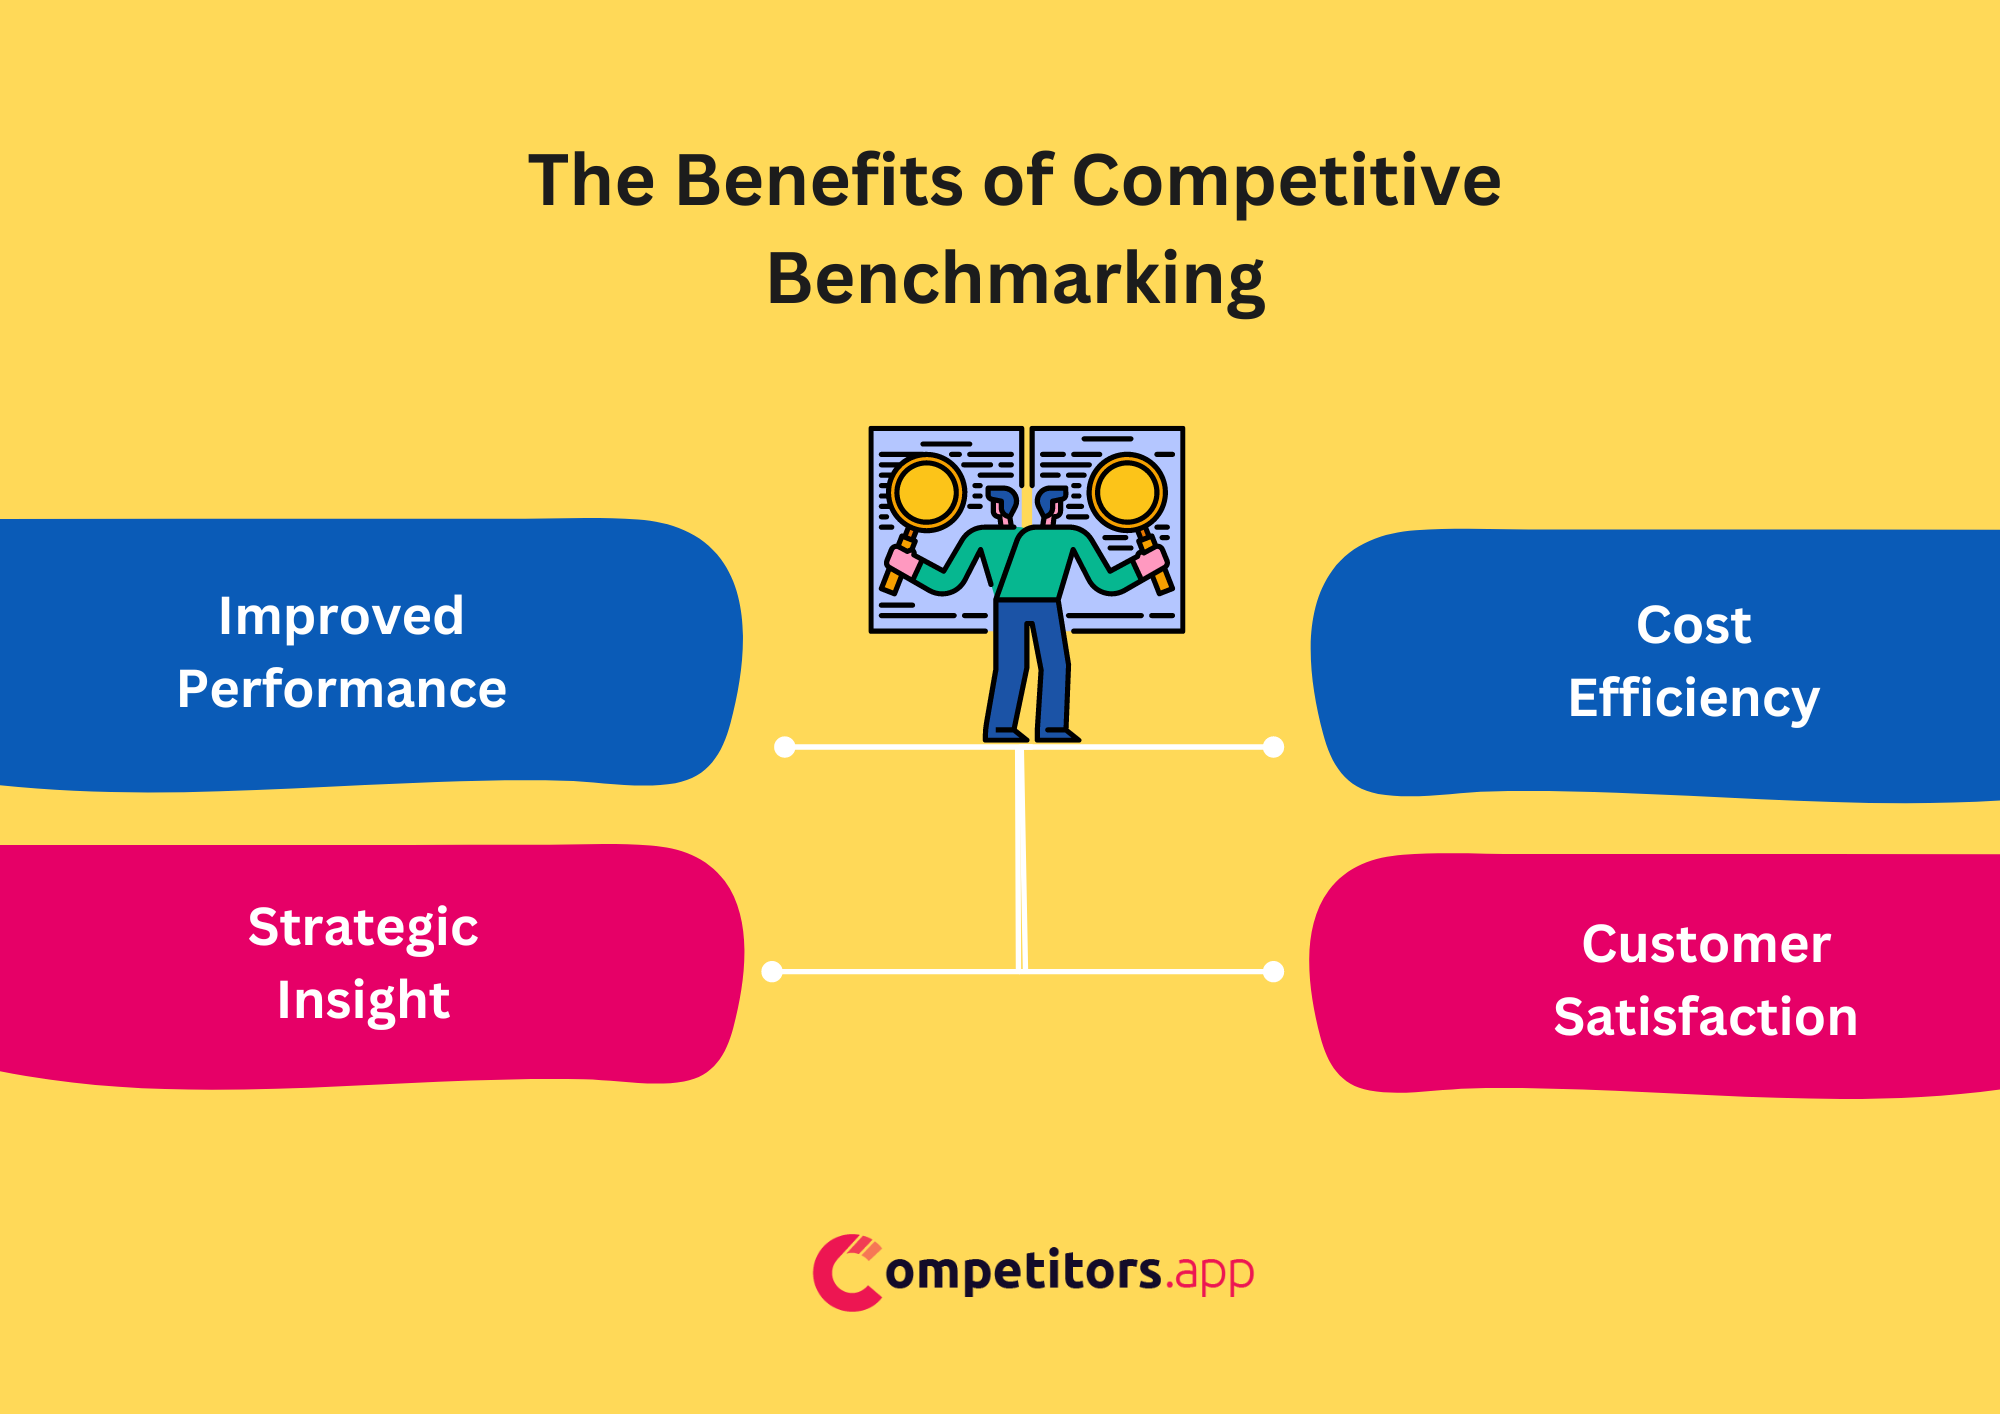 The Benefits of Competitive Benchmarking